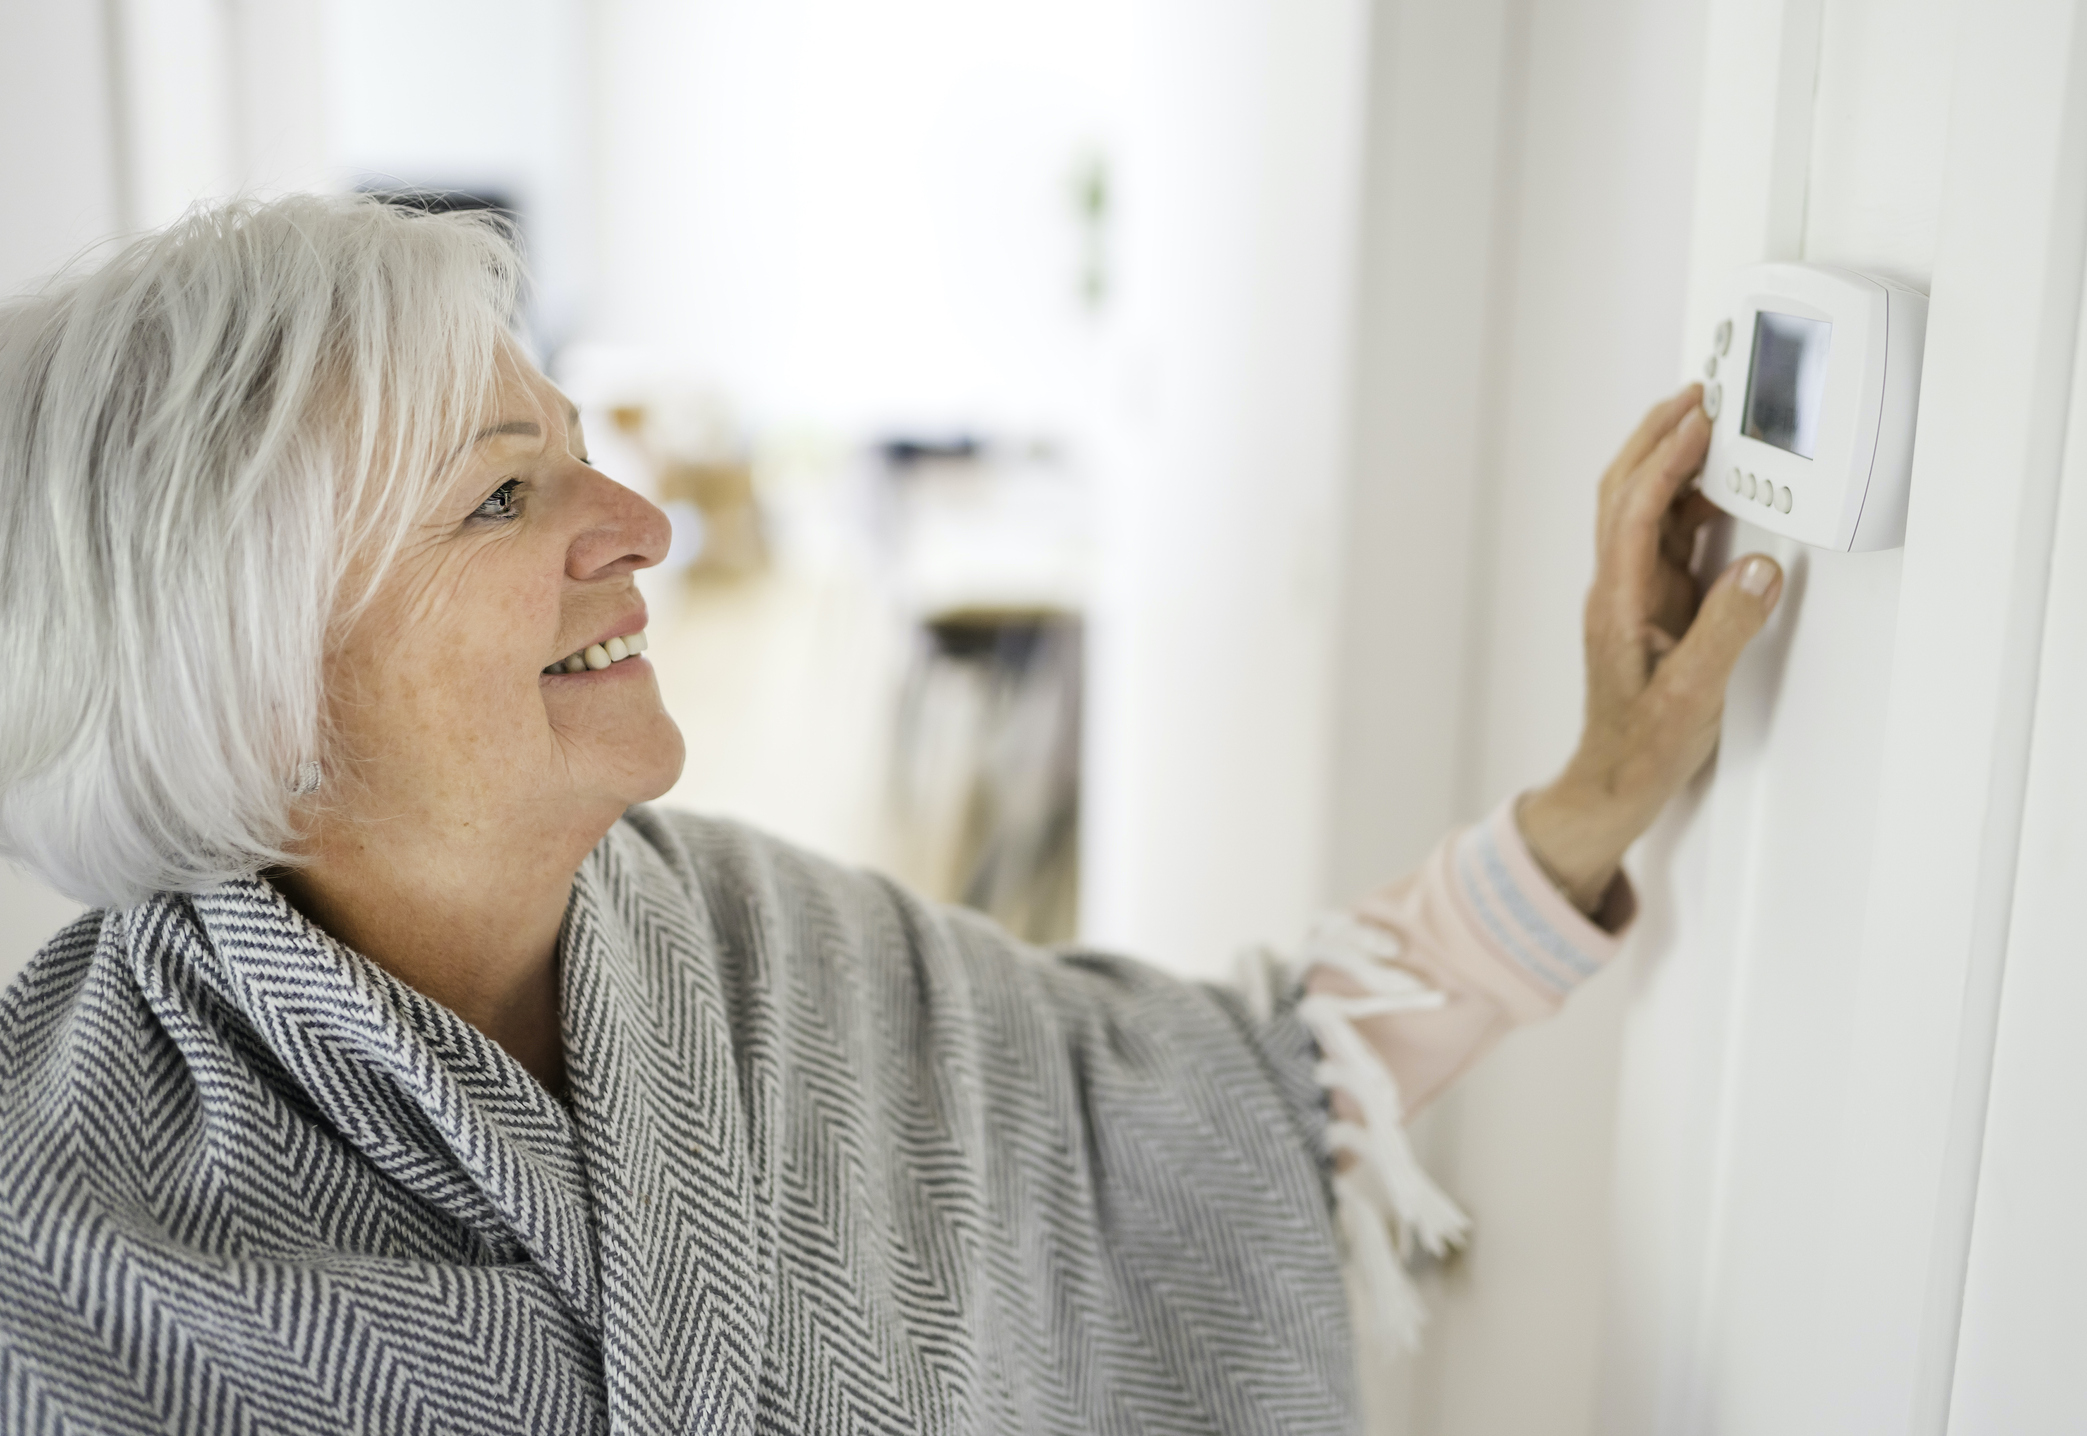 A Senior woman adjusting her thermostat at home